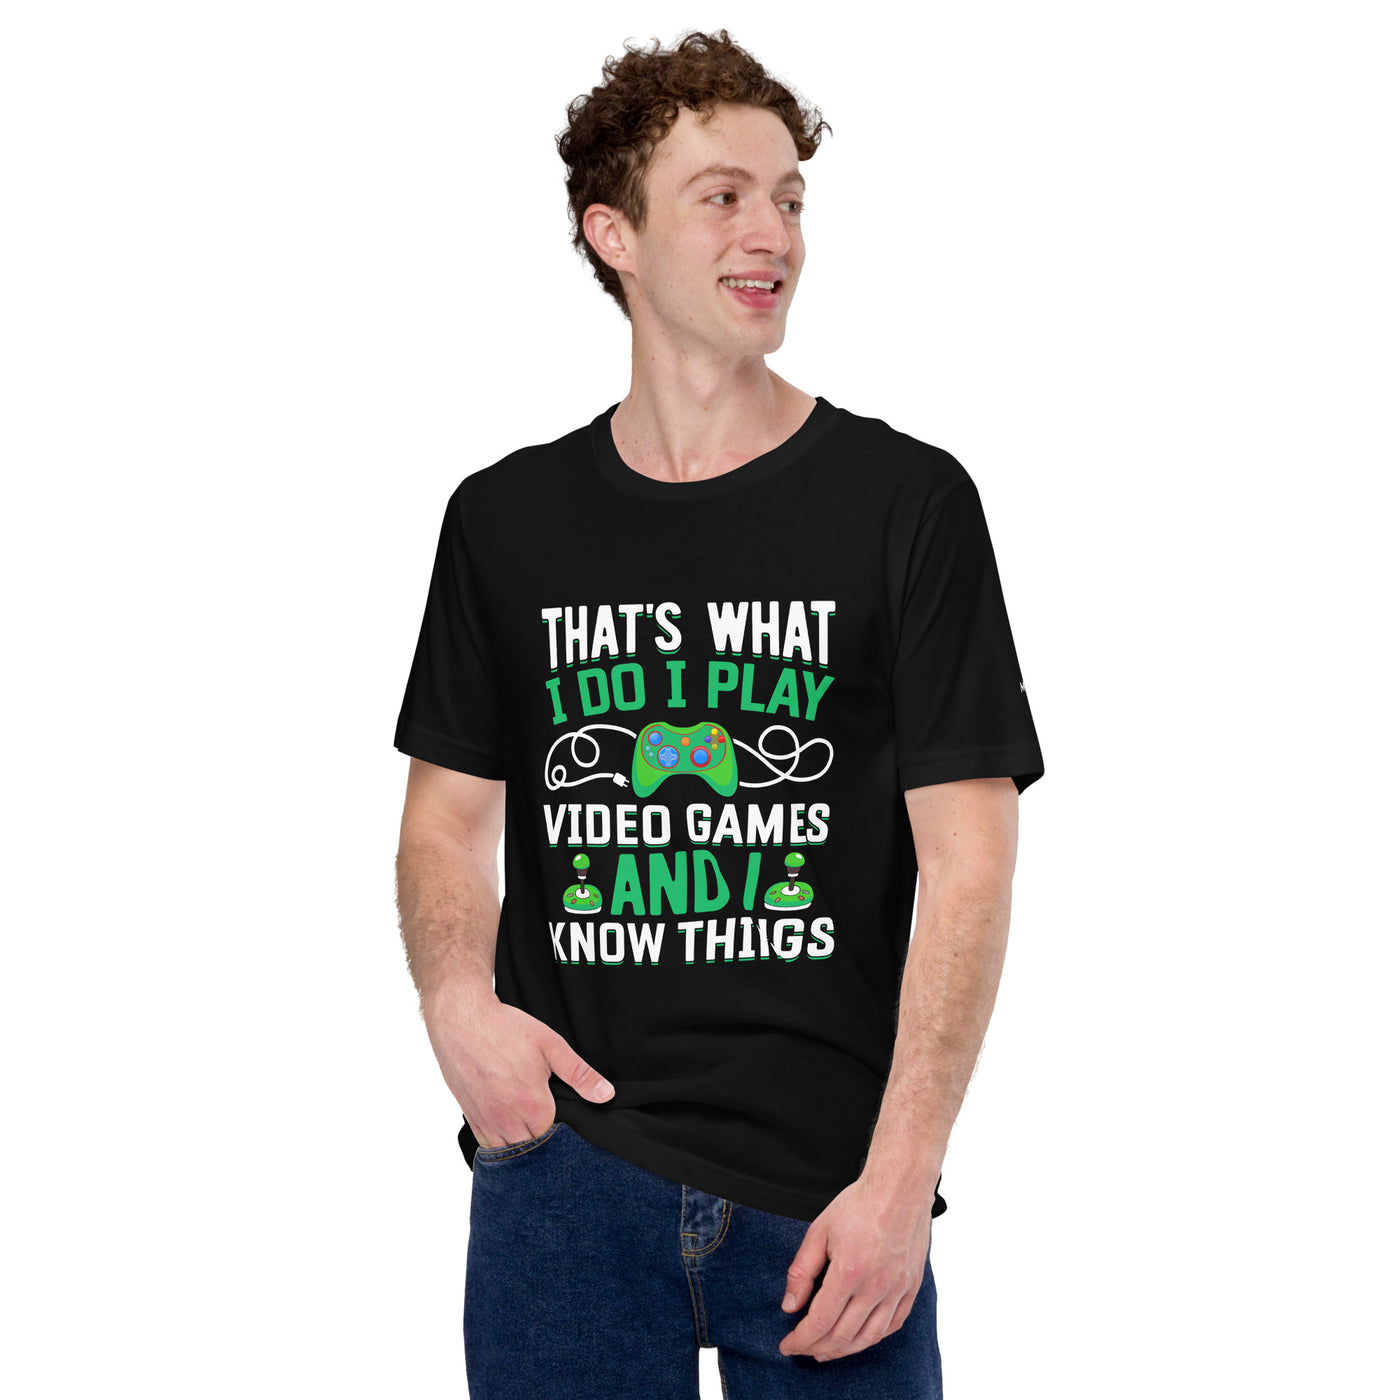 That's What I Do, I play Video Games and I know Things Unisex t-shirt